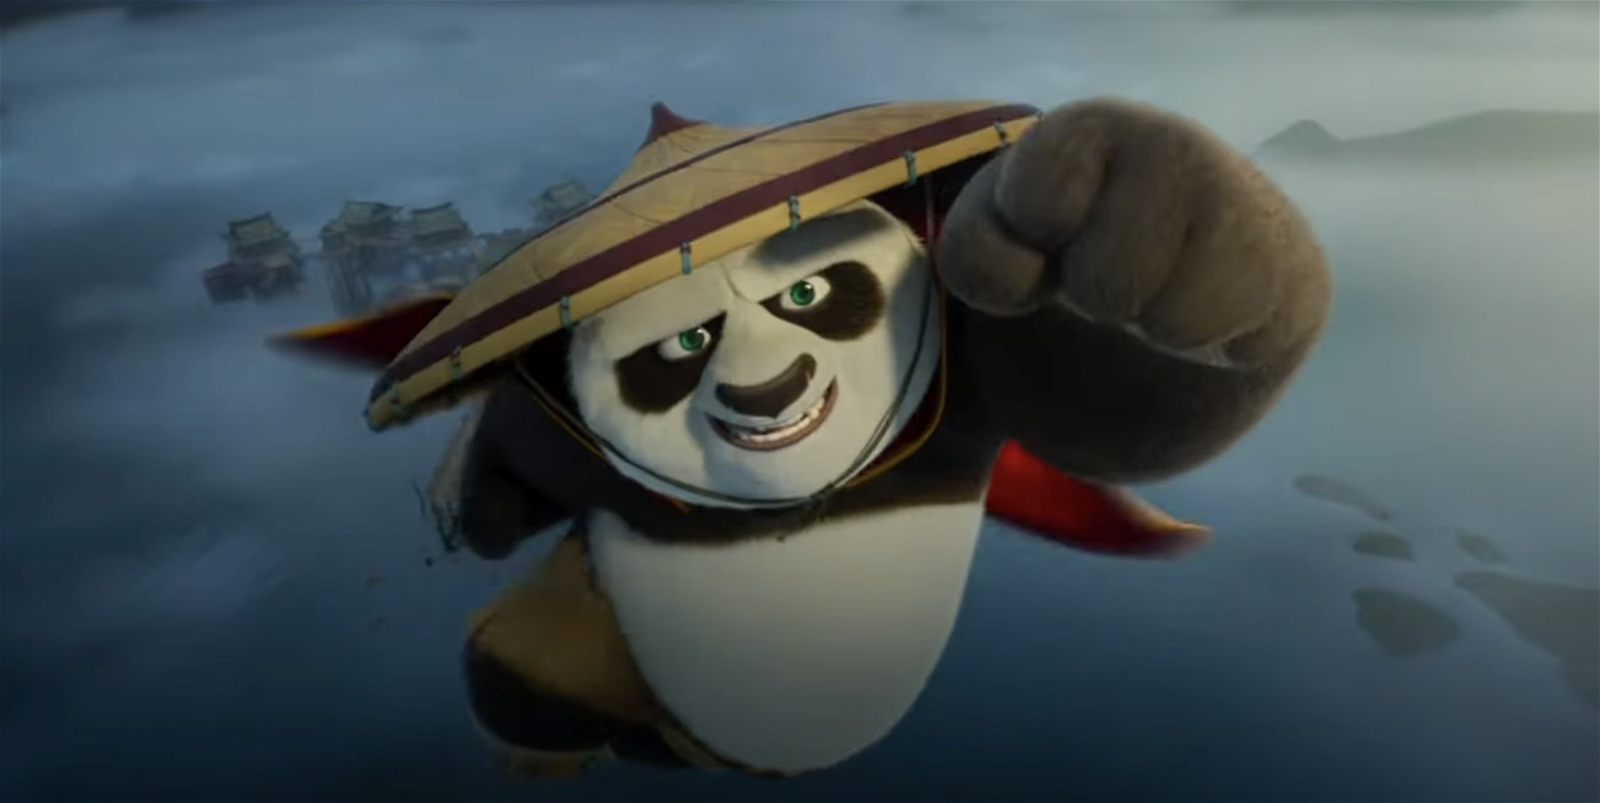 Jack Black voice the character of Po in Kung Fu Panda 4